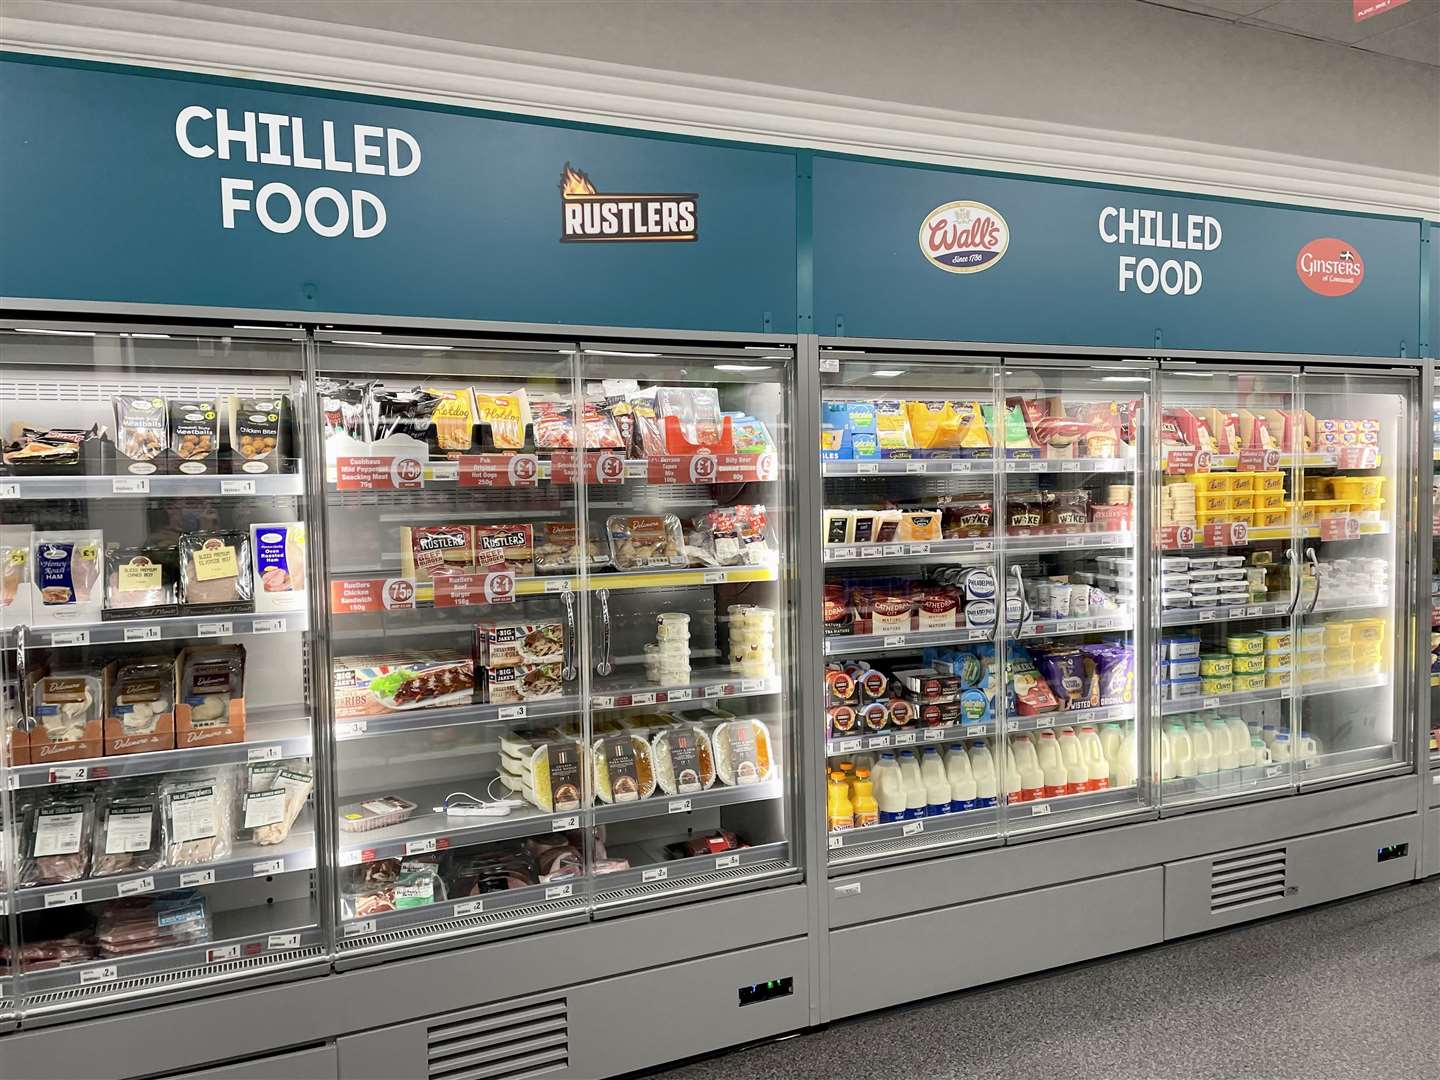 The new Poundland in Deal offers chilled and frozen food